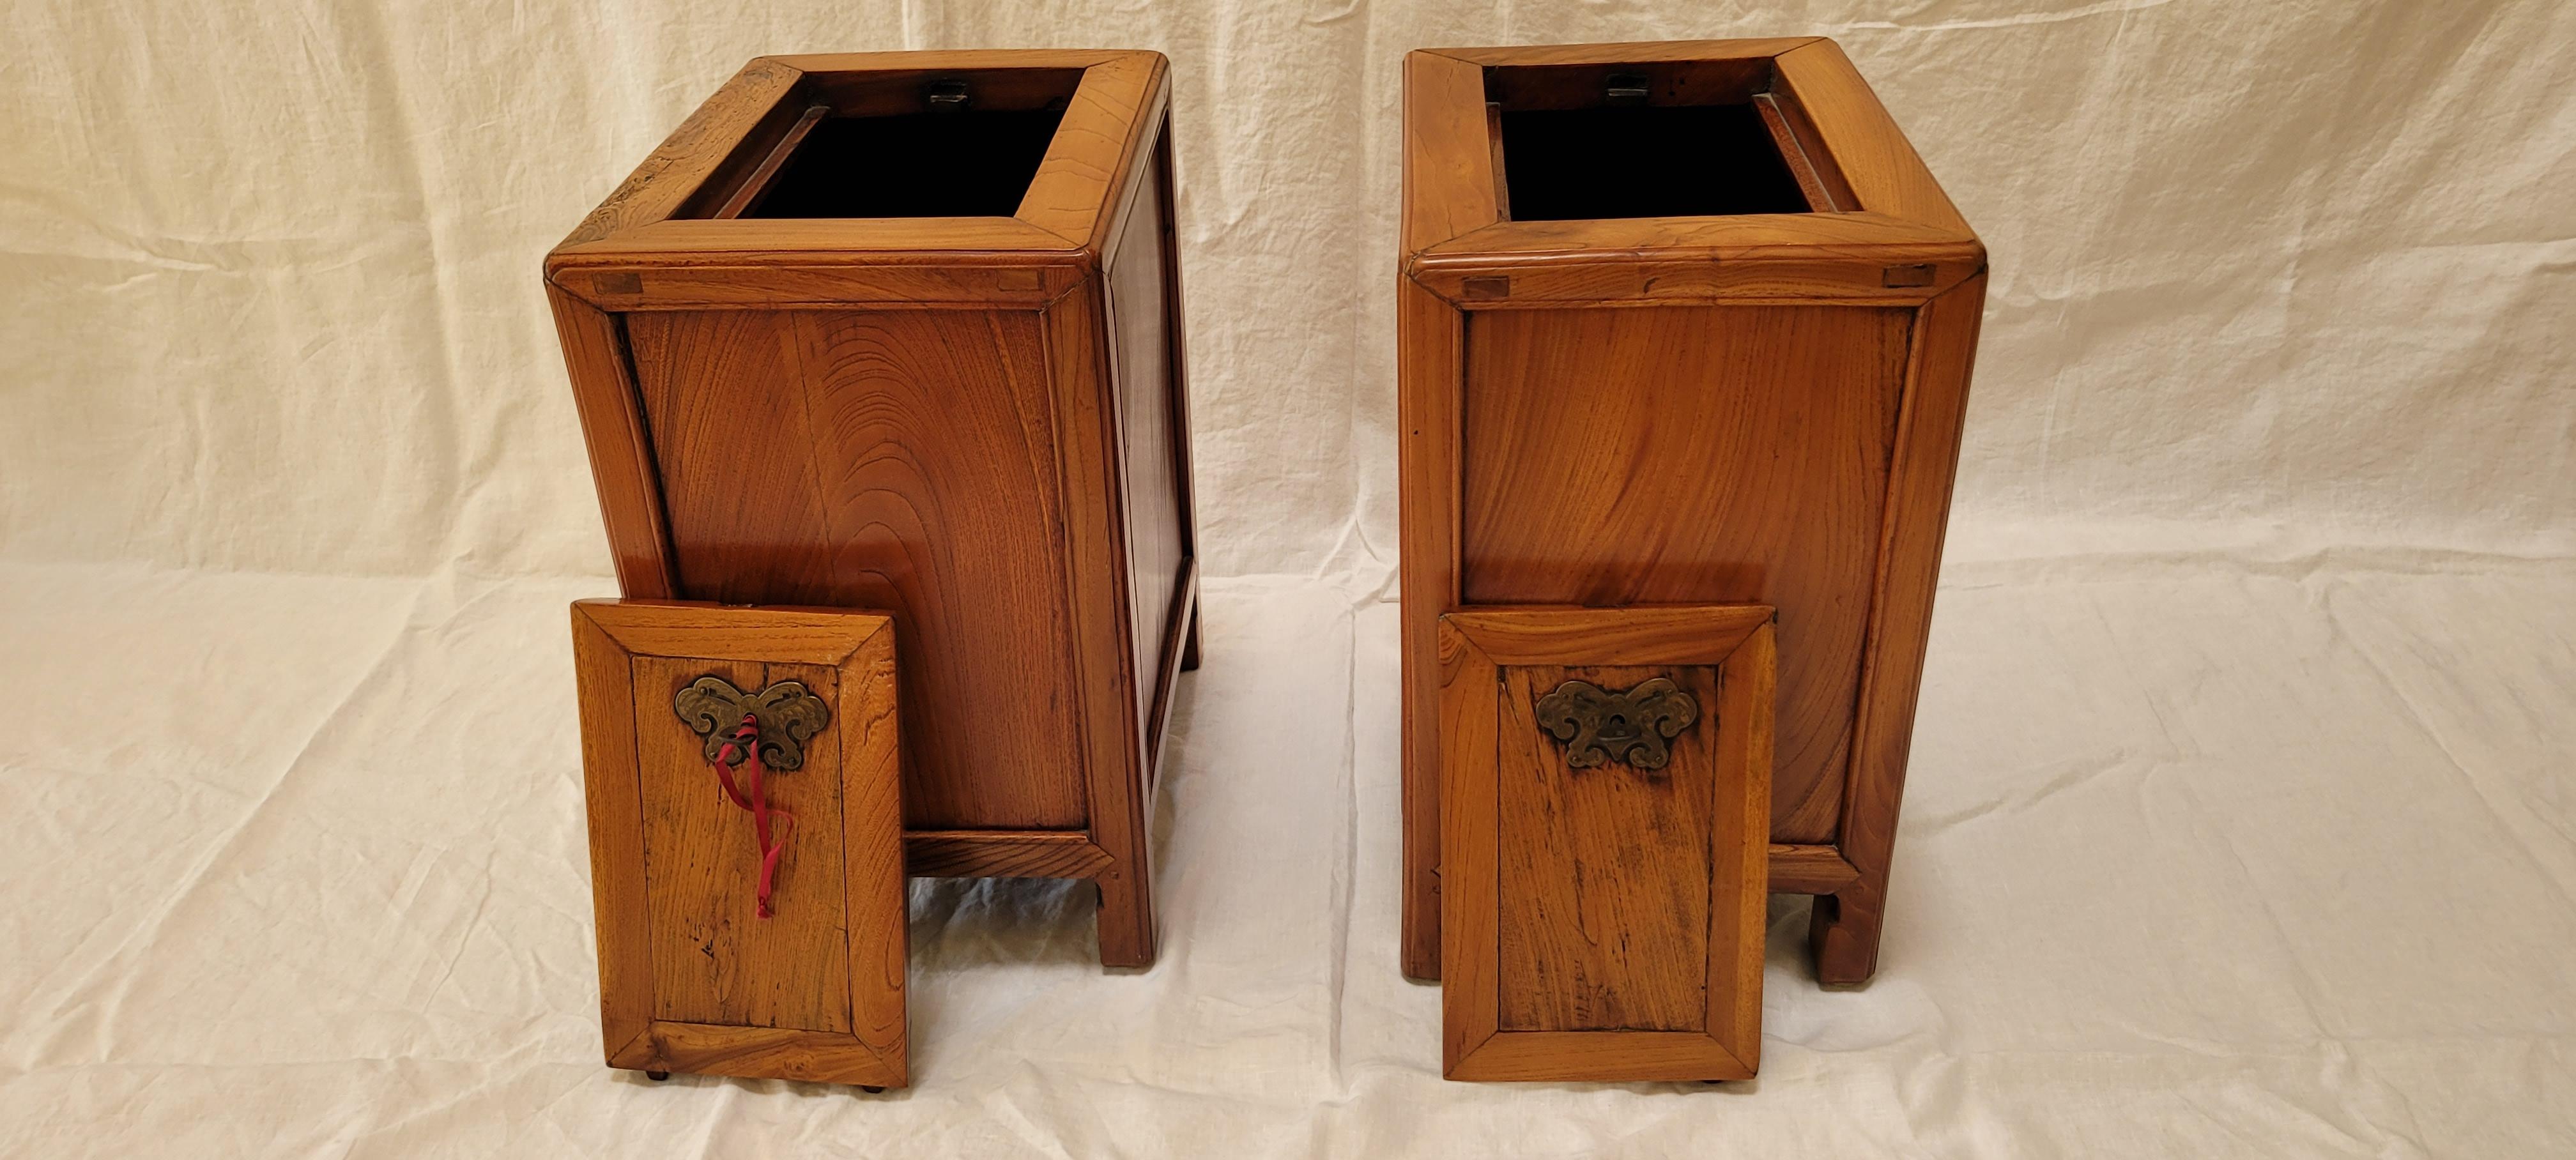 19th Century Pair of Money Chests For Sale 4